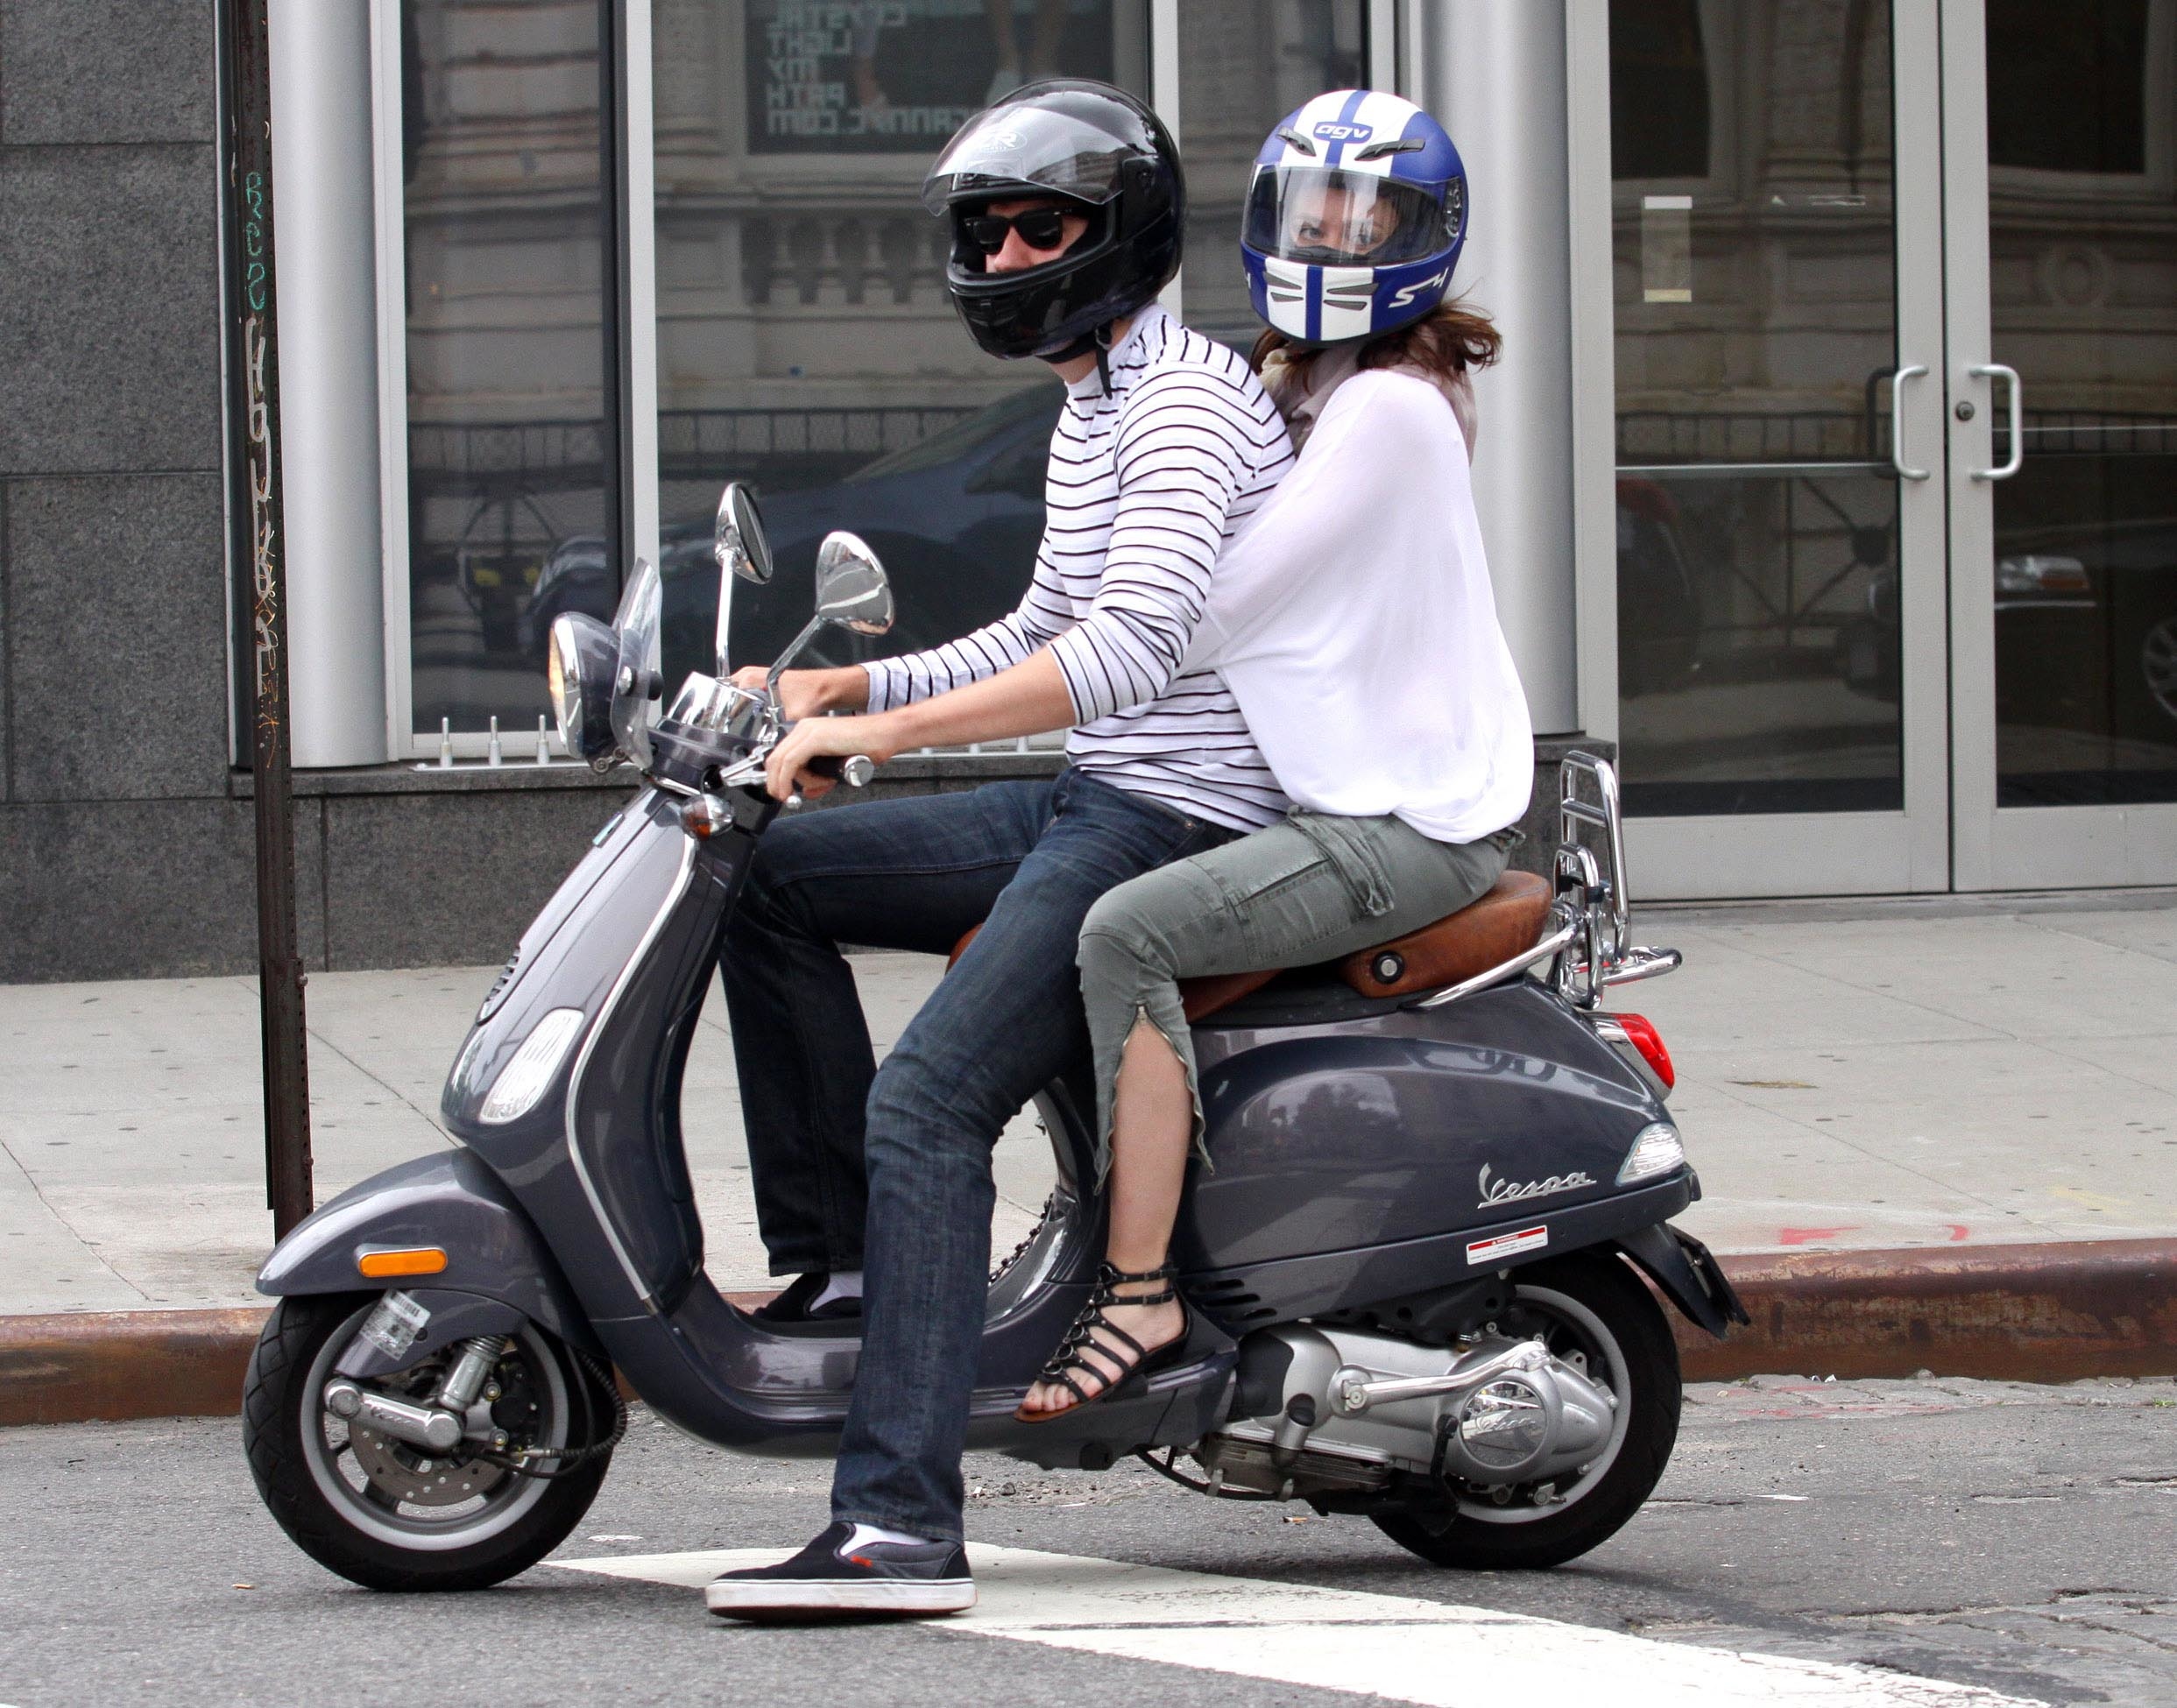 British actress EMILY BLUNT and fiancé JOHN KRASINSKI ride their Vespa scooter in the East Village, NYC. (Philip Ramey Photography, LLC—Corbis via Getty Images)